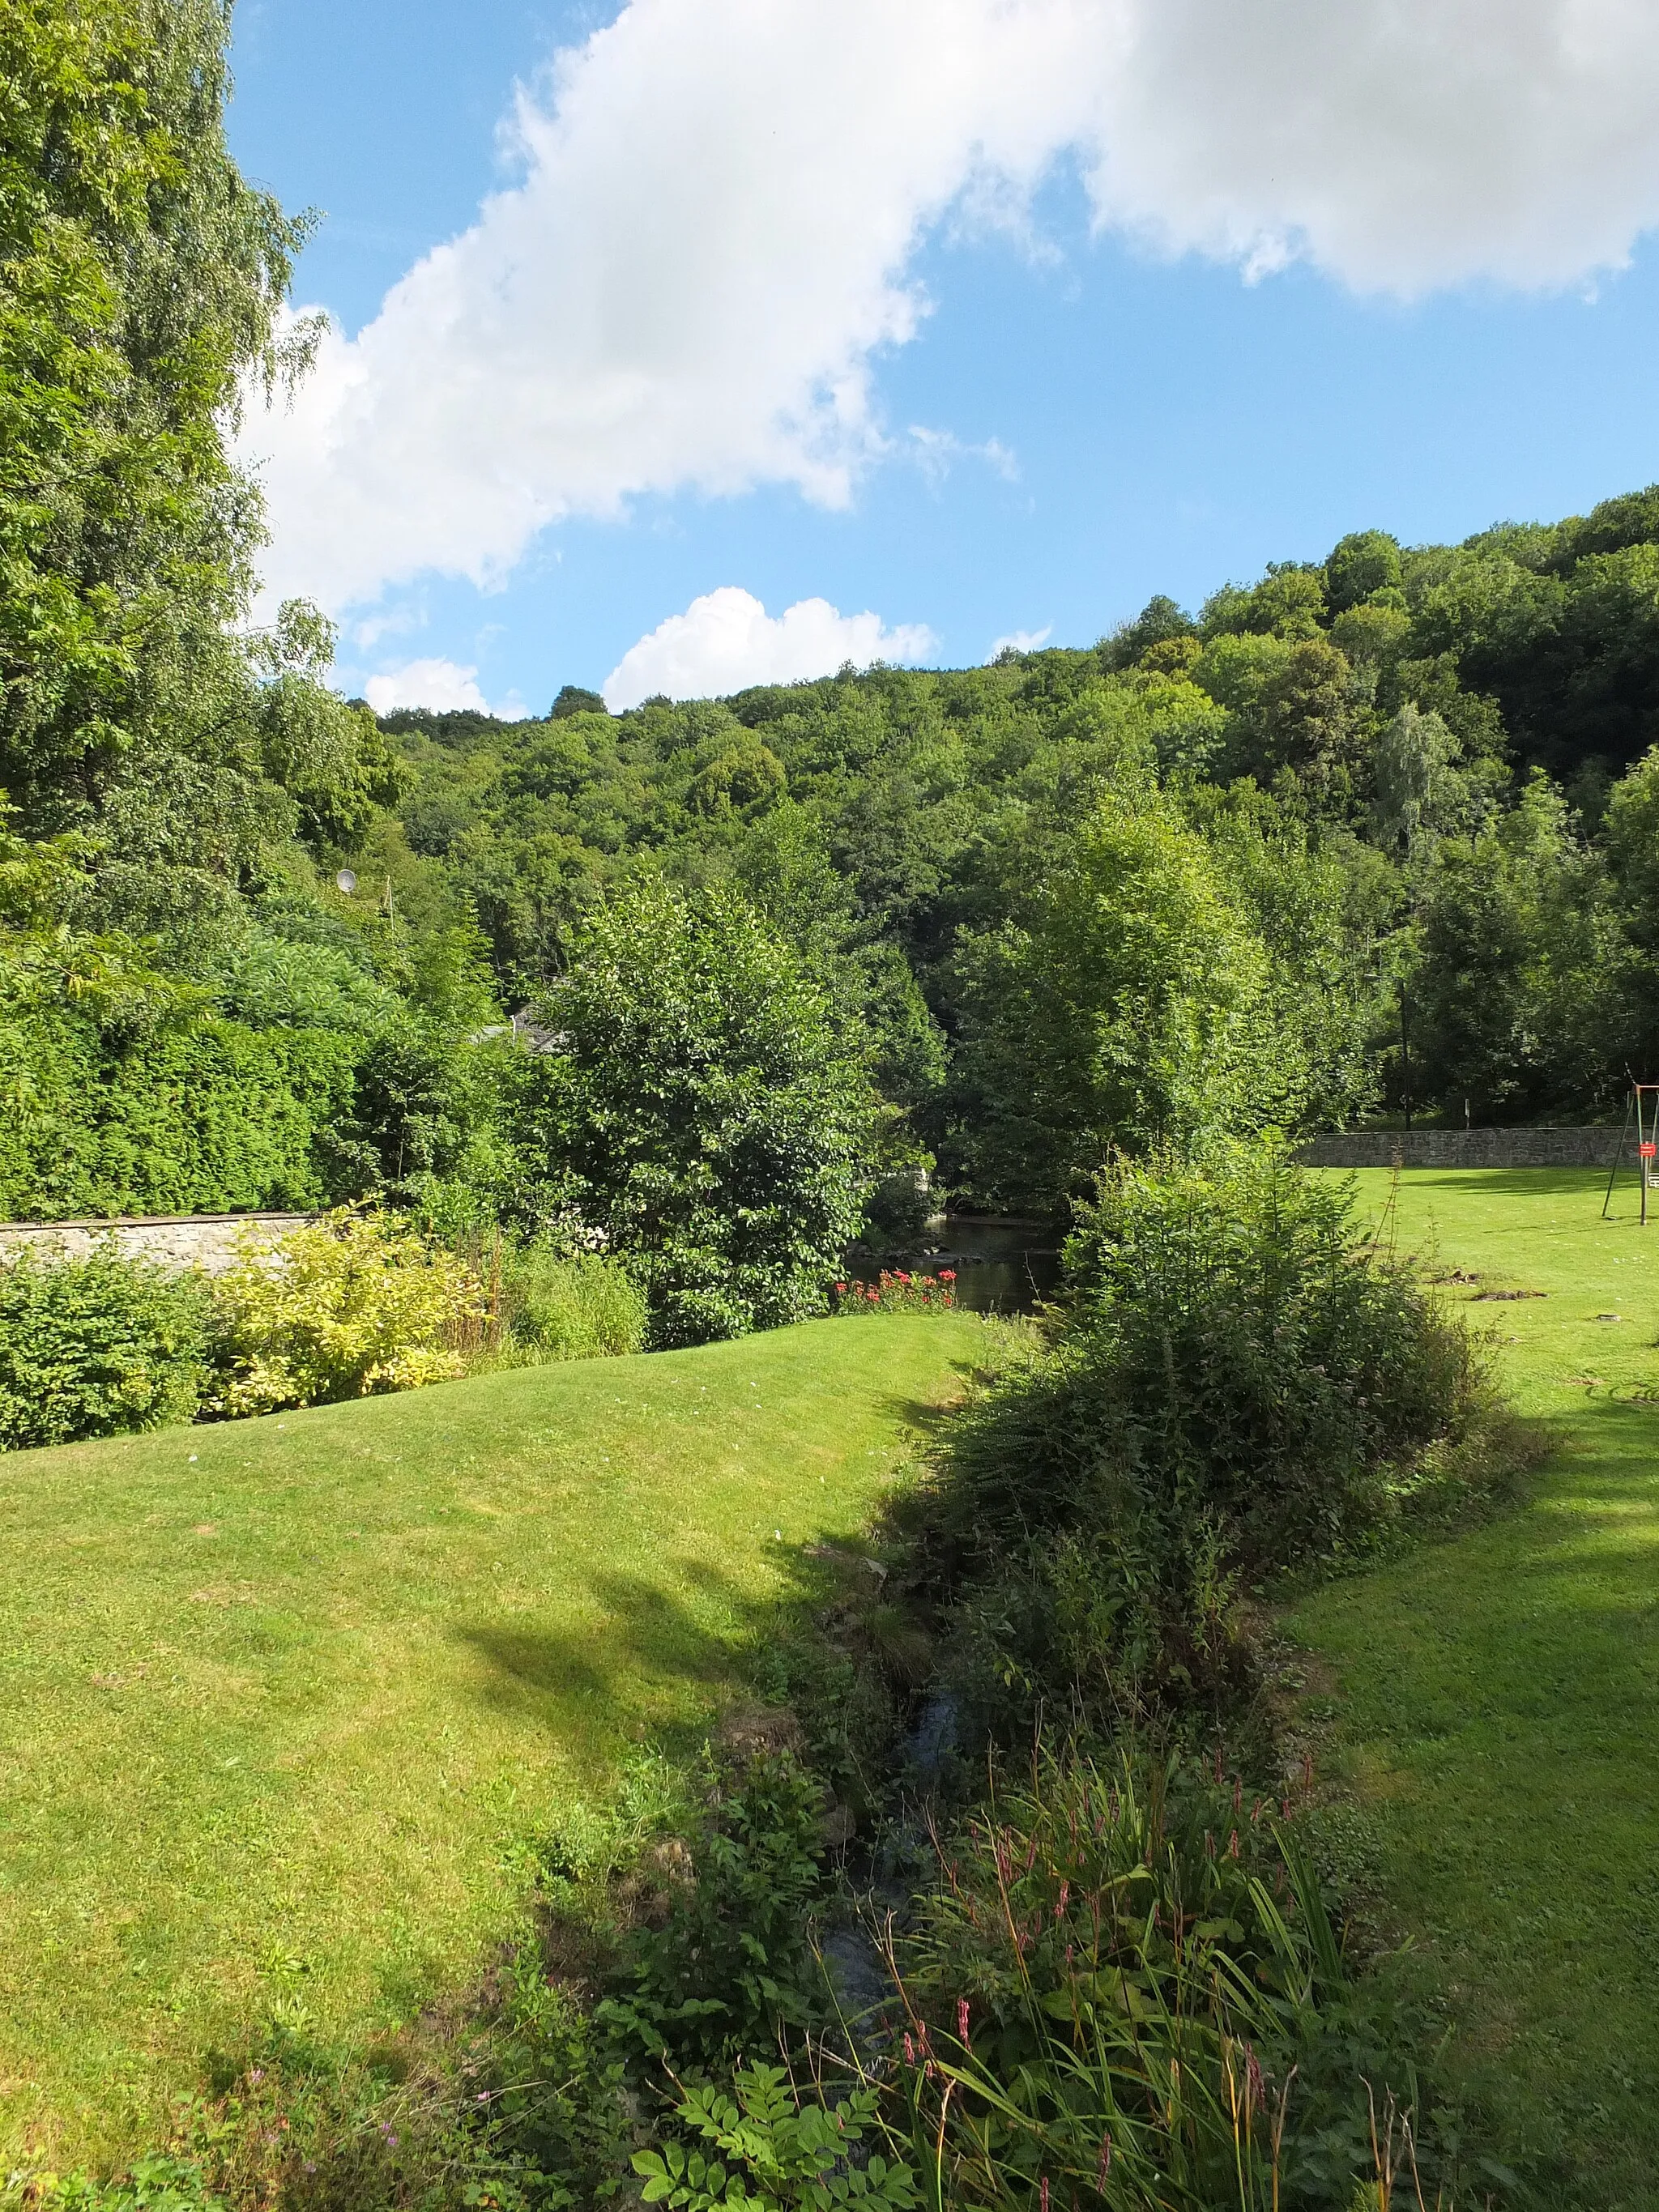 Photo showing: The valley of the river Samson in Goyet (Gesves), Wallonia, Belgium.